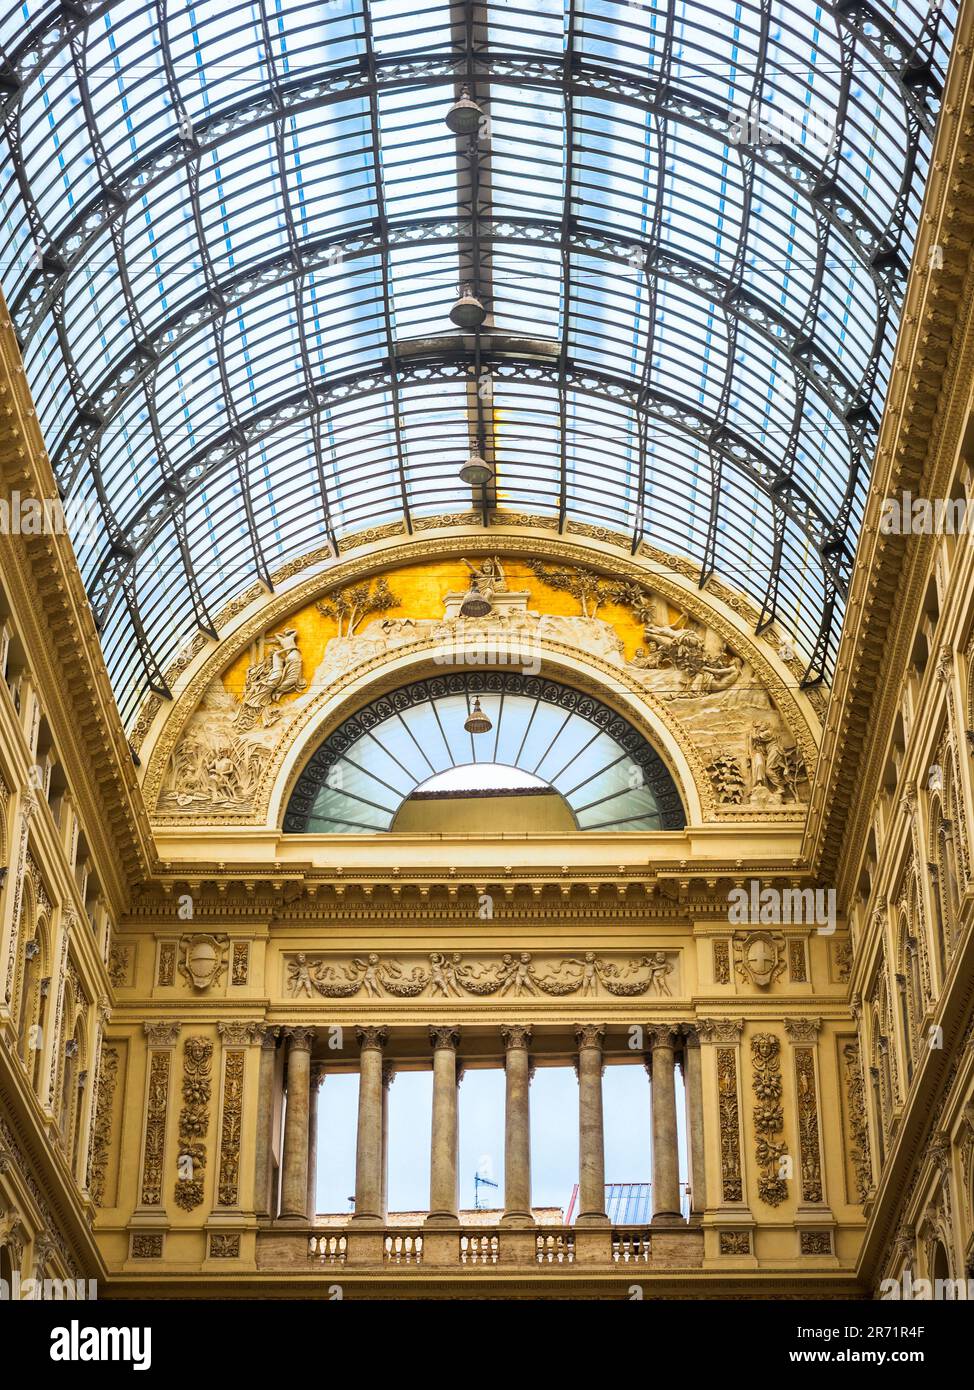 Glass Dome of Galleria Umberto I shopping gallery built between 1887 and 1890 and named after Umberto I, King of Italy at the time of construction - Naples, Italy Stock Photo